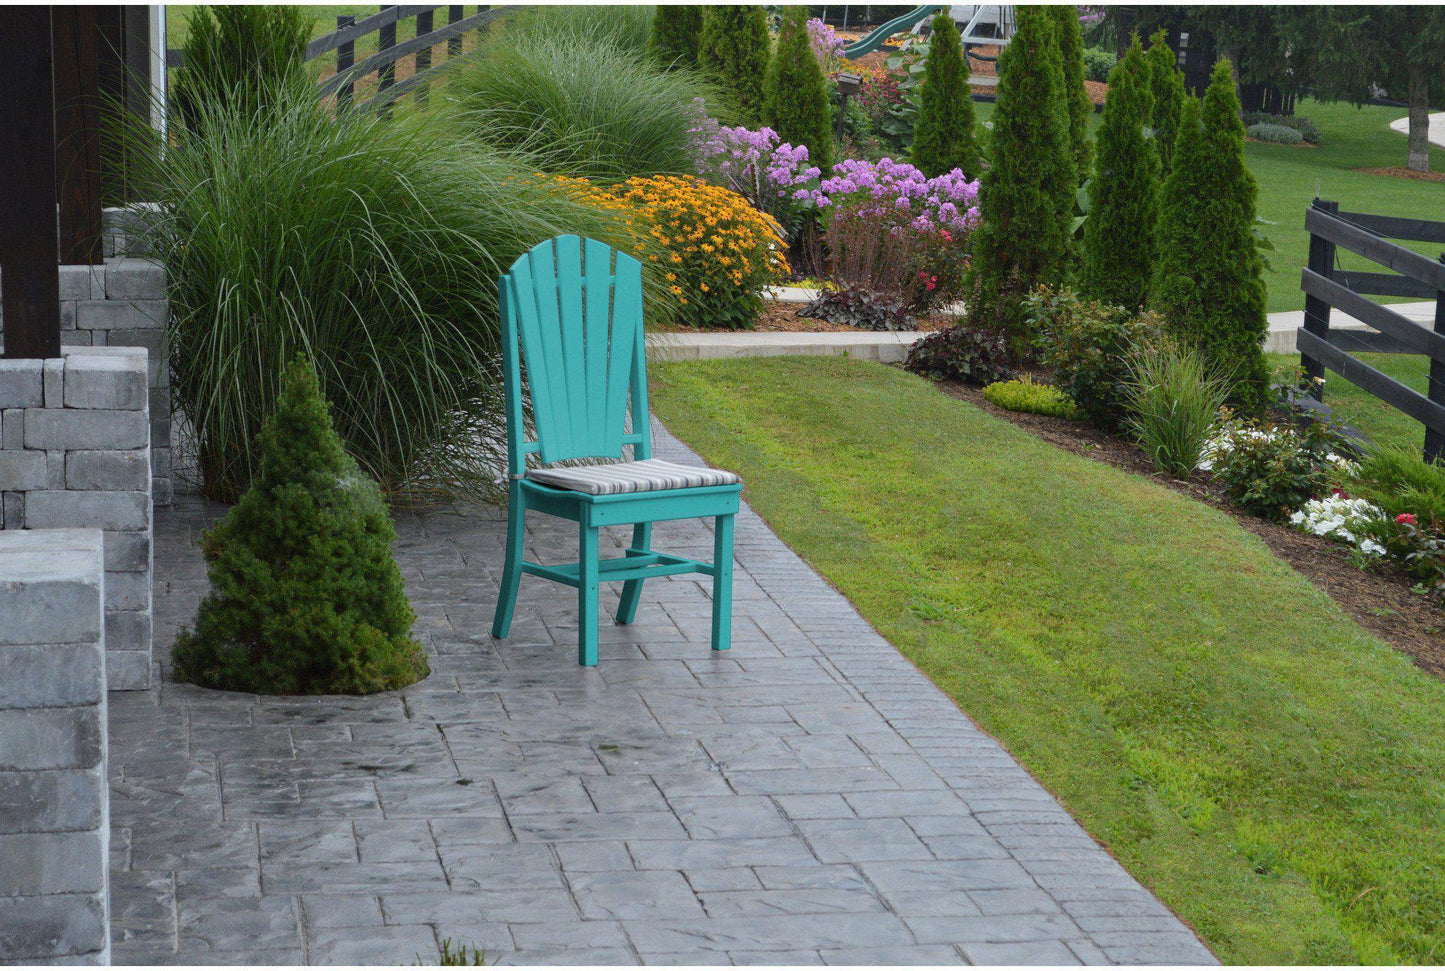 A&L Furniture Company Recycled Plastic Adirondack Dining Chair - Aruba Blue